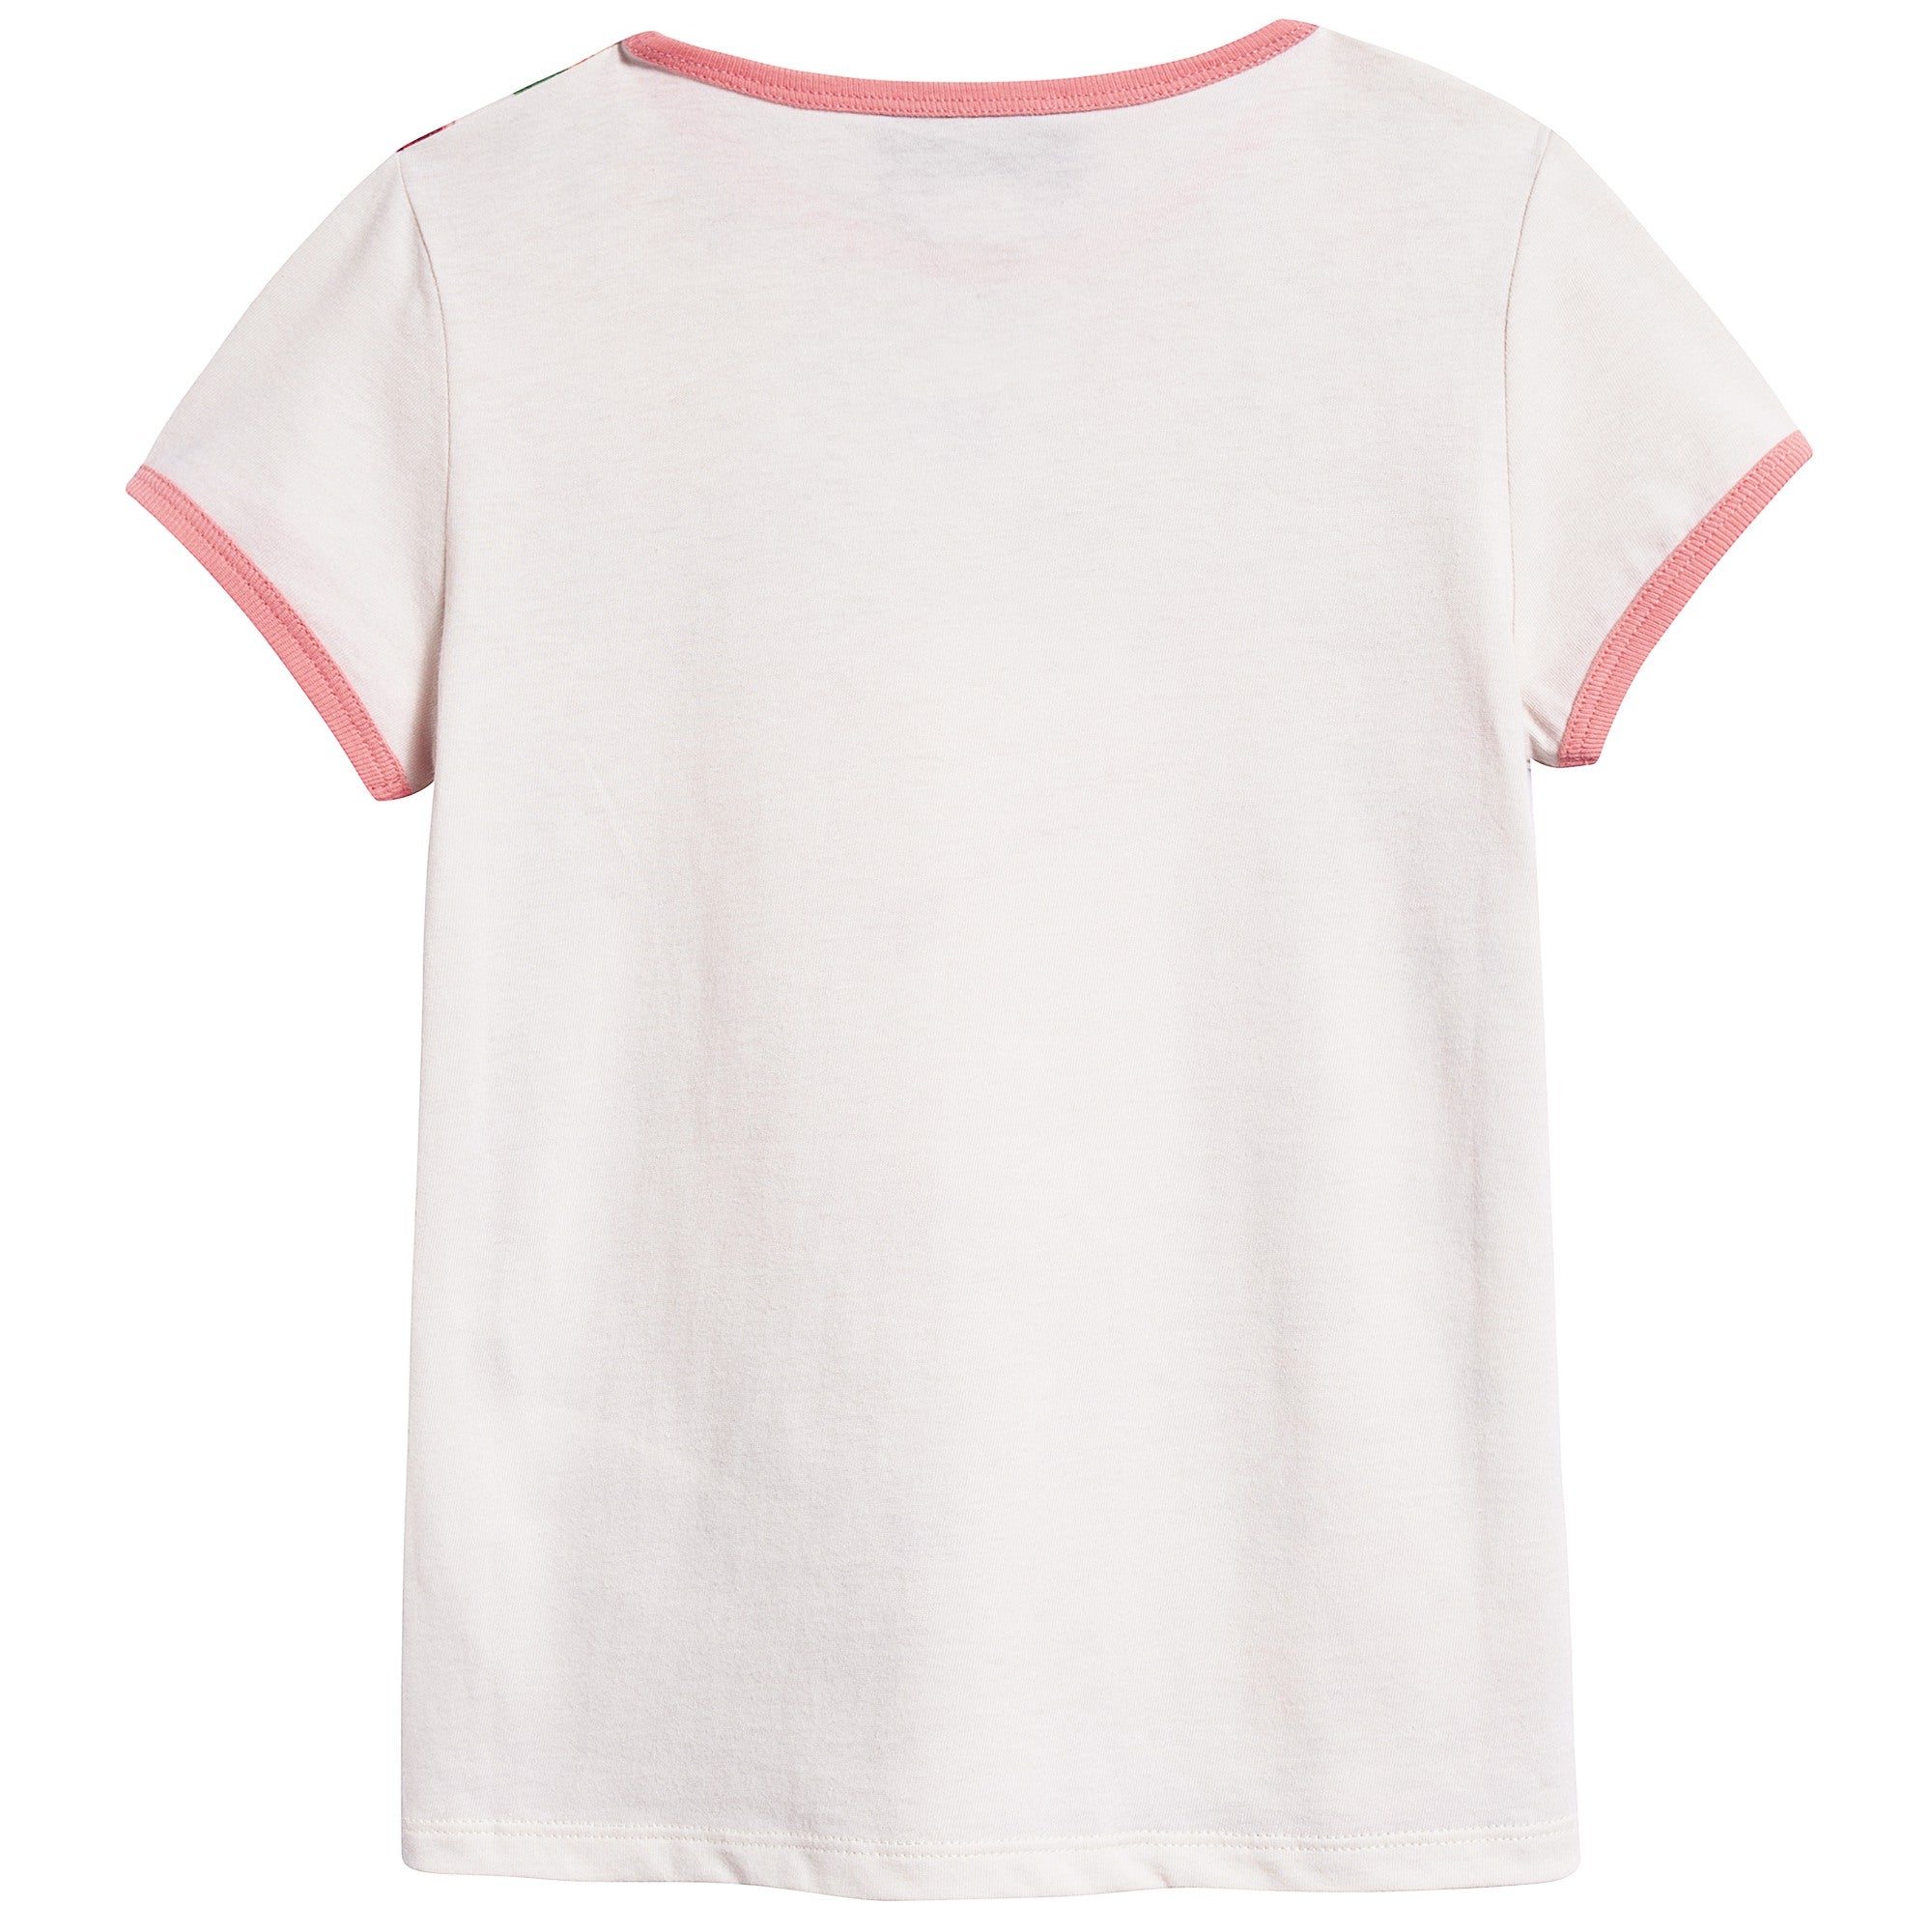 Girls White Color Printed T-shirt